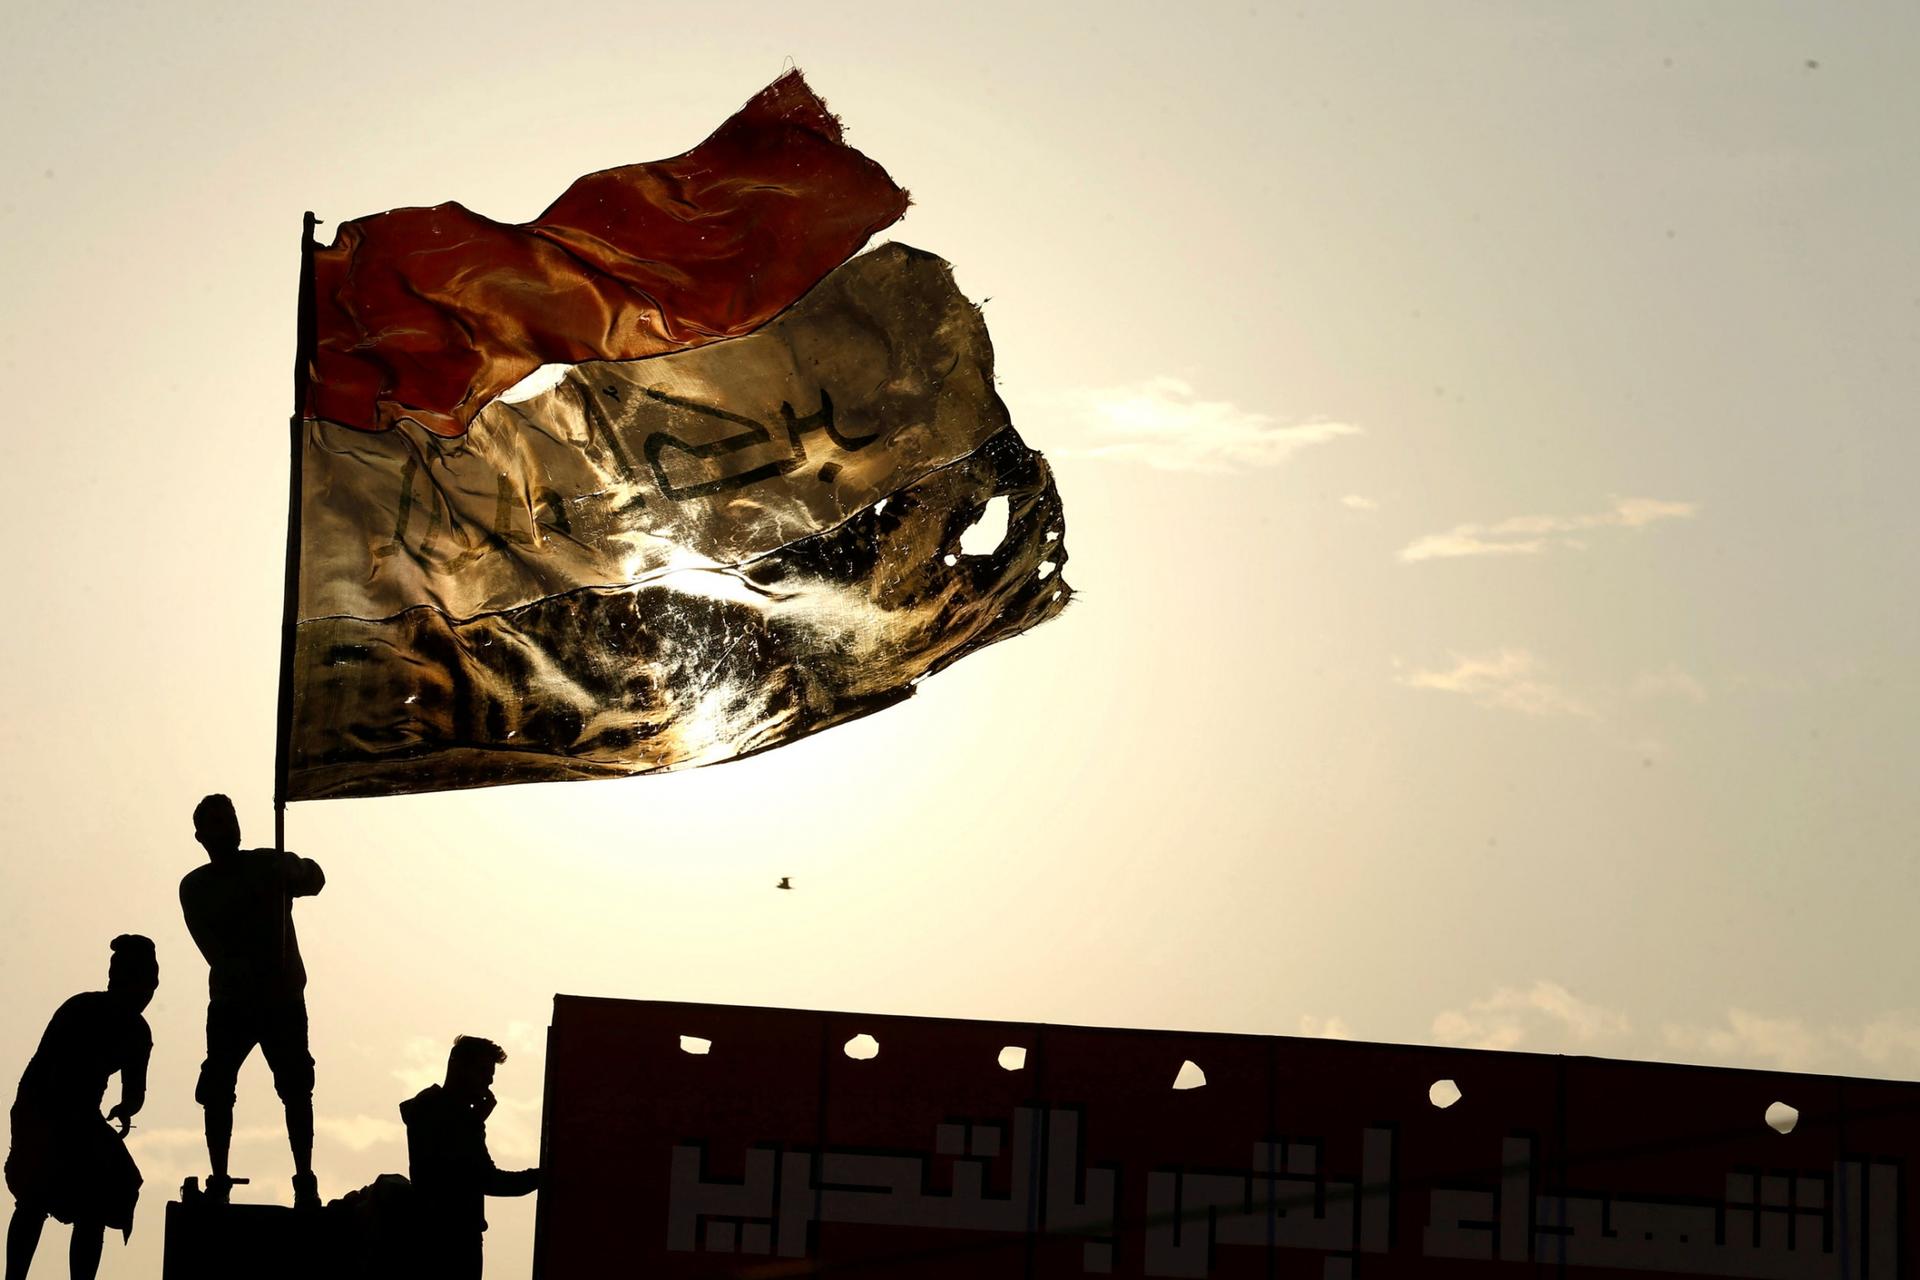 Three people are shown with one holding a large tattered Iraqi flag